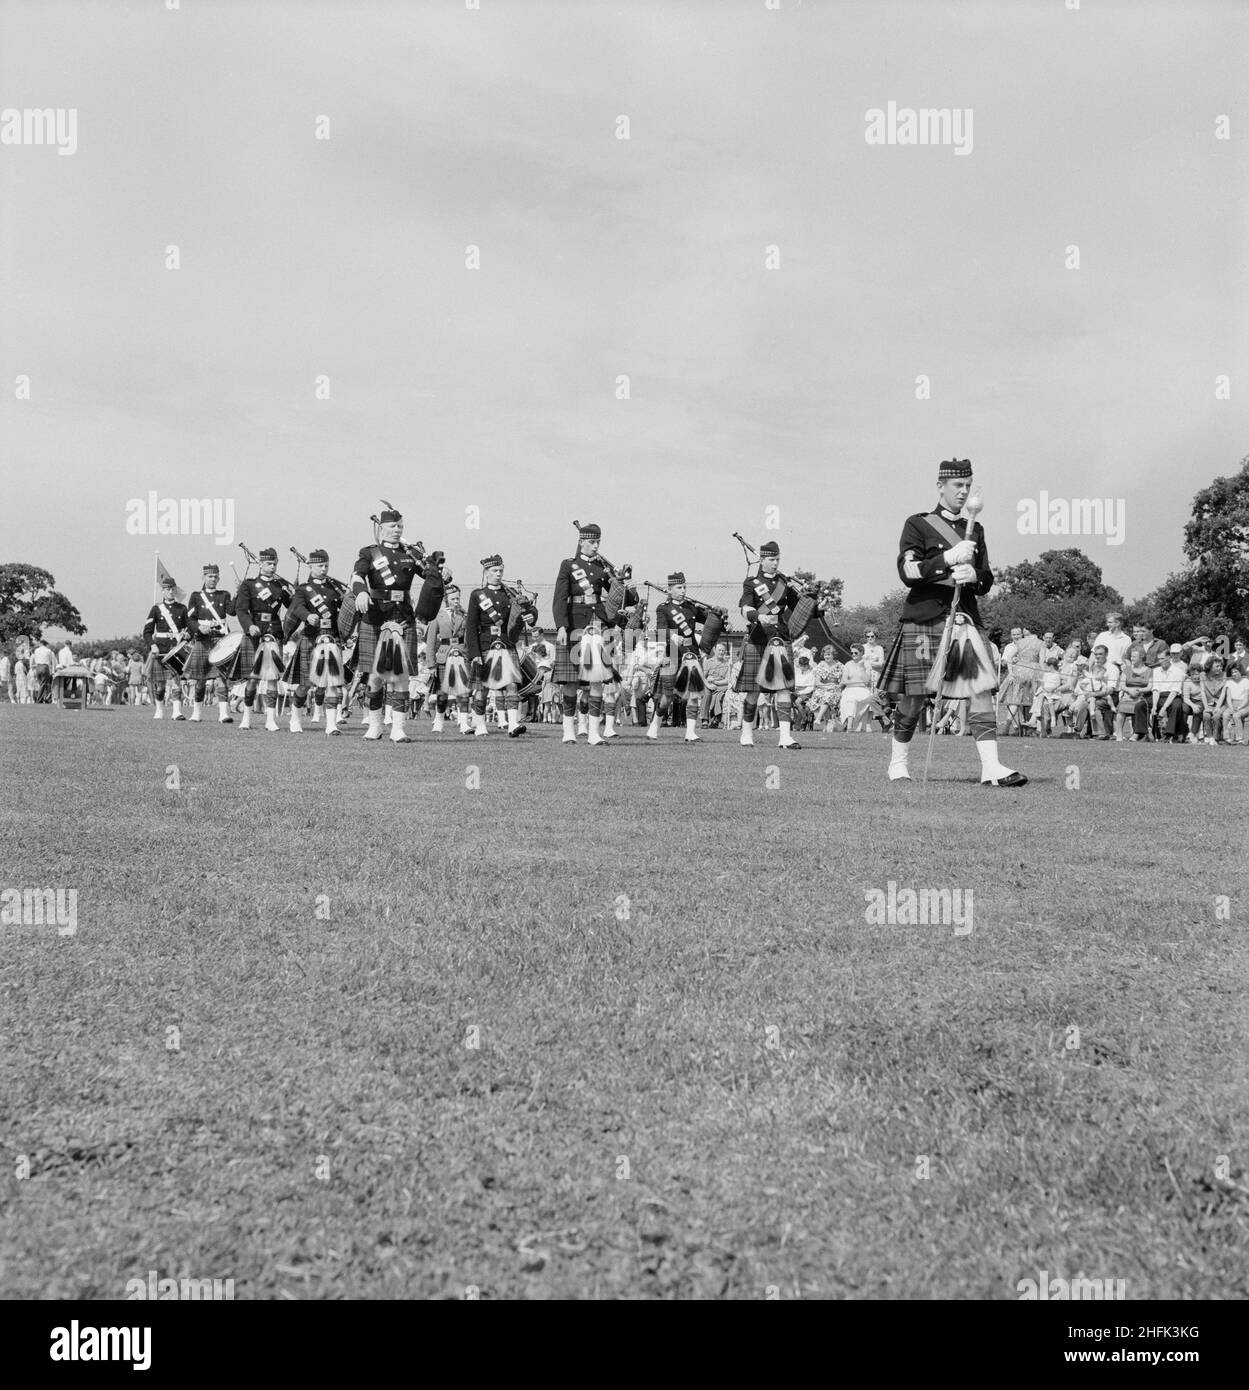 Laing Sports Ground, Rowley Lane, Elstree, Barnet, London, 18/06/1960. A marching Scottish pipe band performing during a Laing sports day at Elstree. Stock Photo